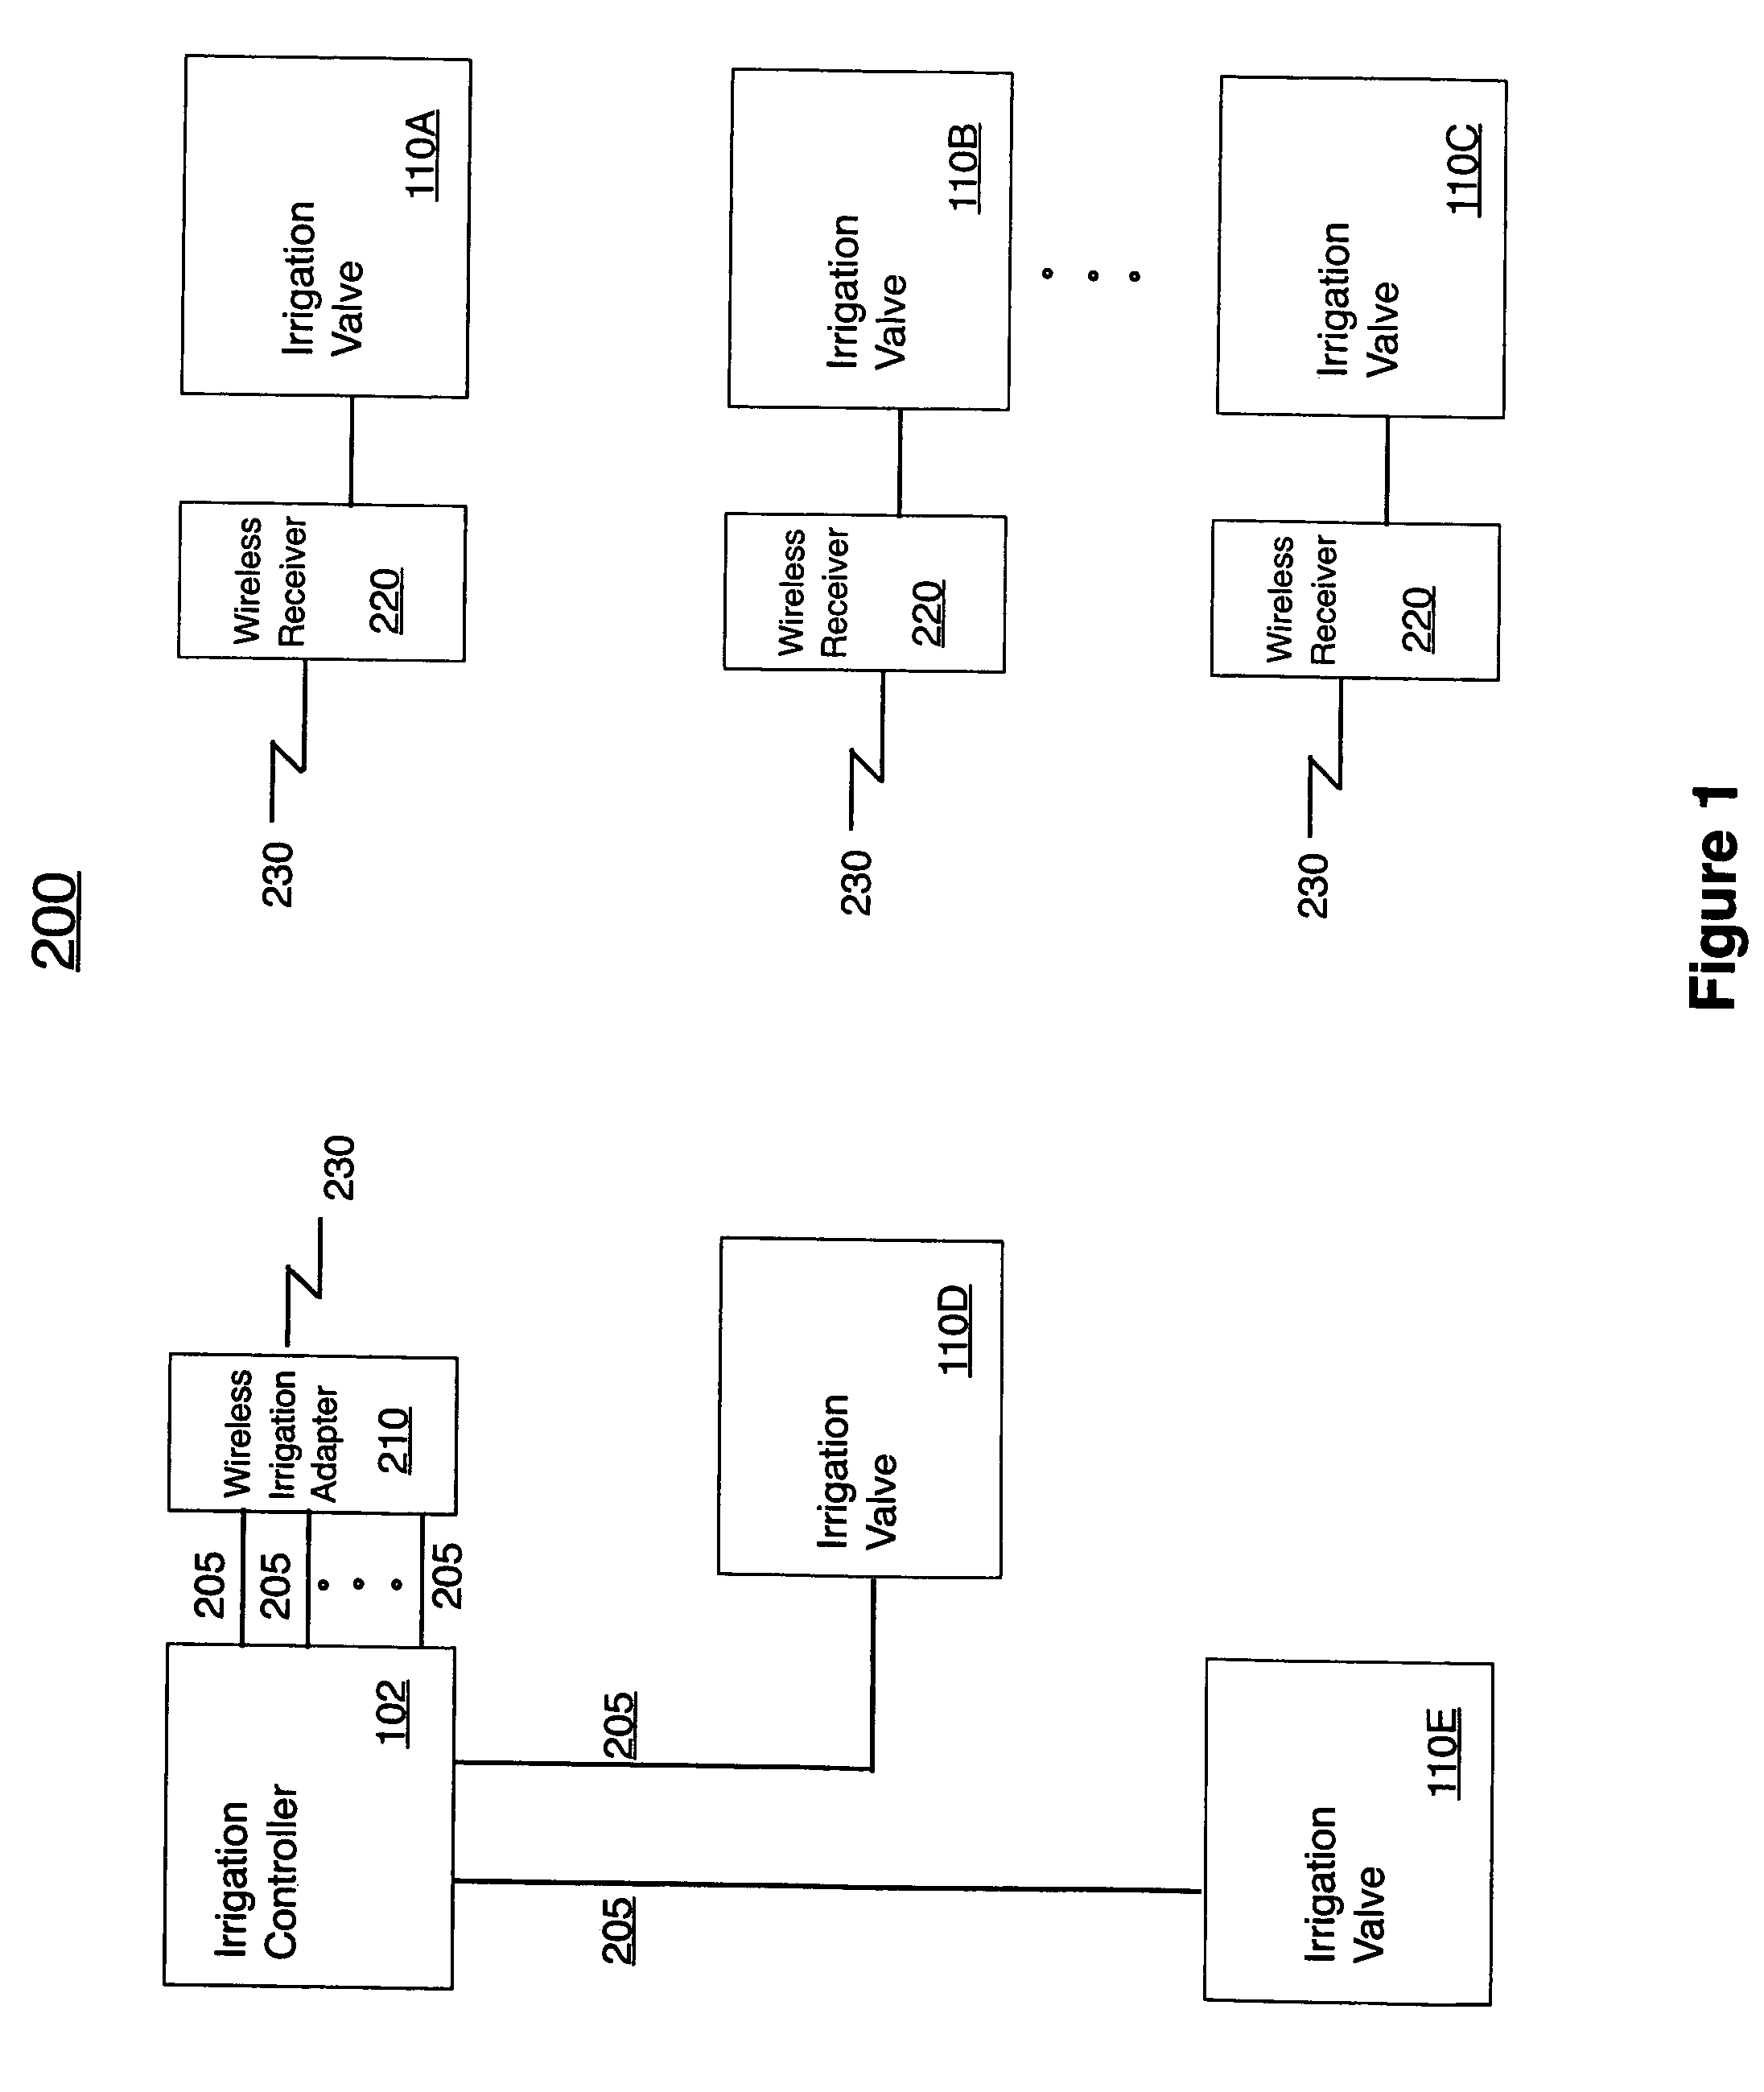 Systems and methods for adaptation to wireless remote control of irrigation valves from existing hardwired control devices